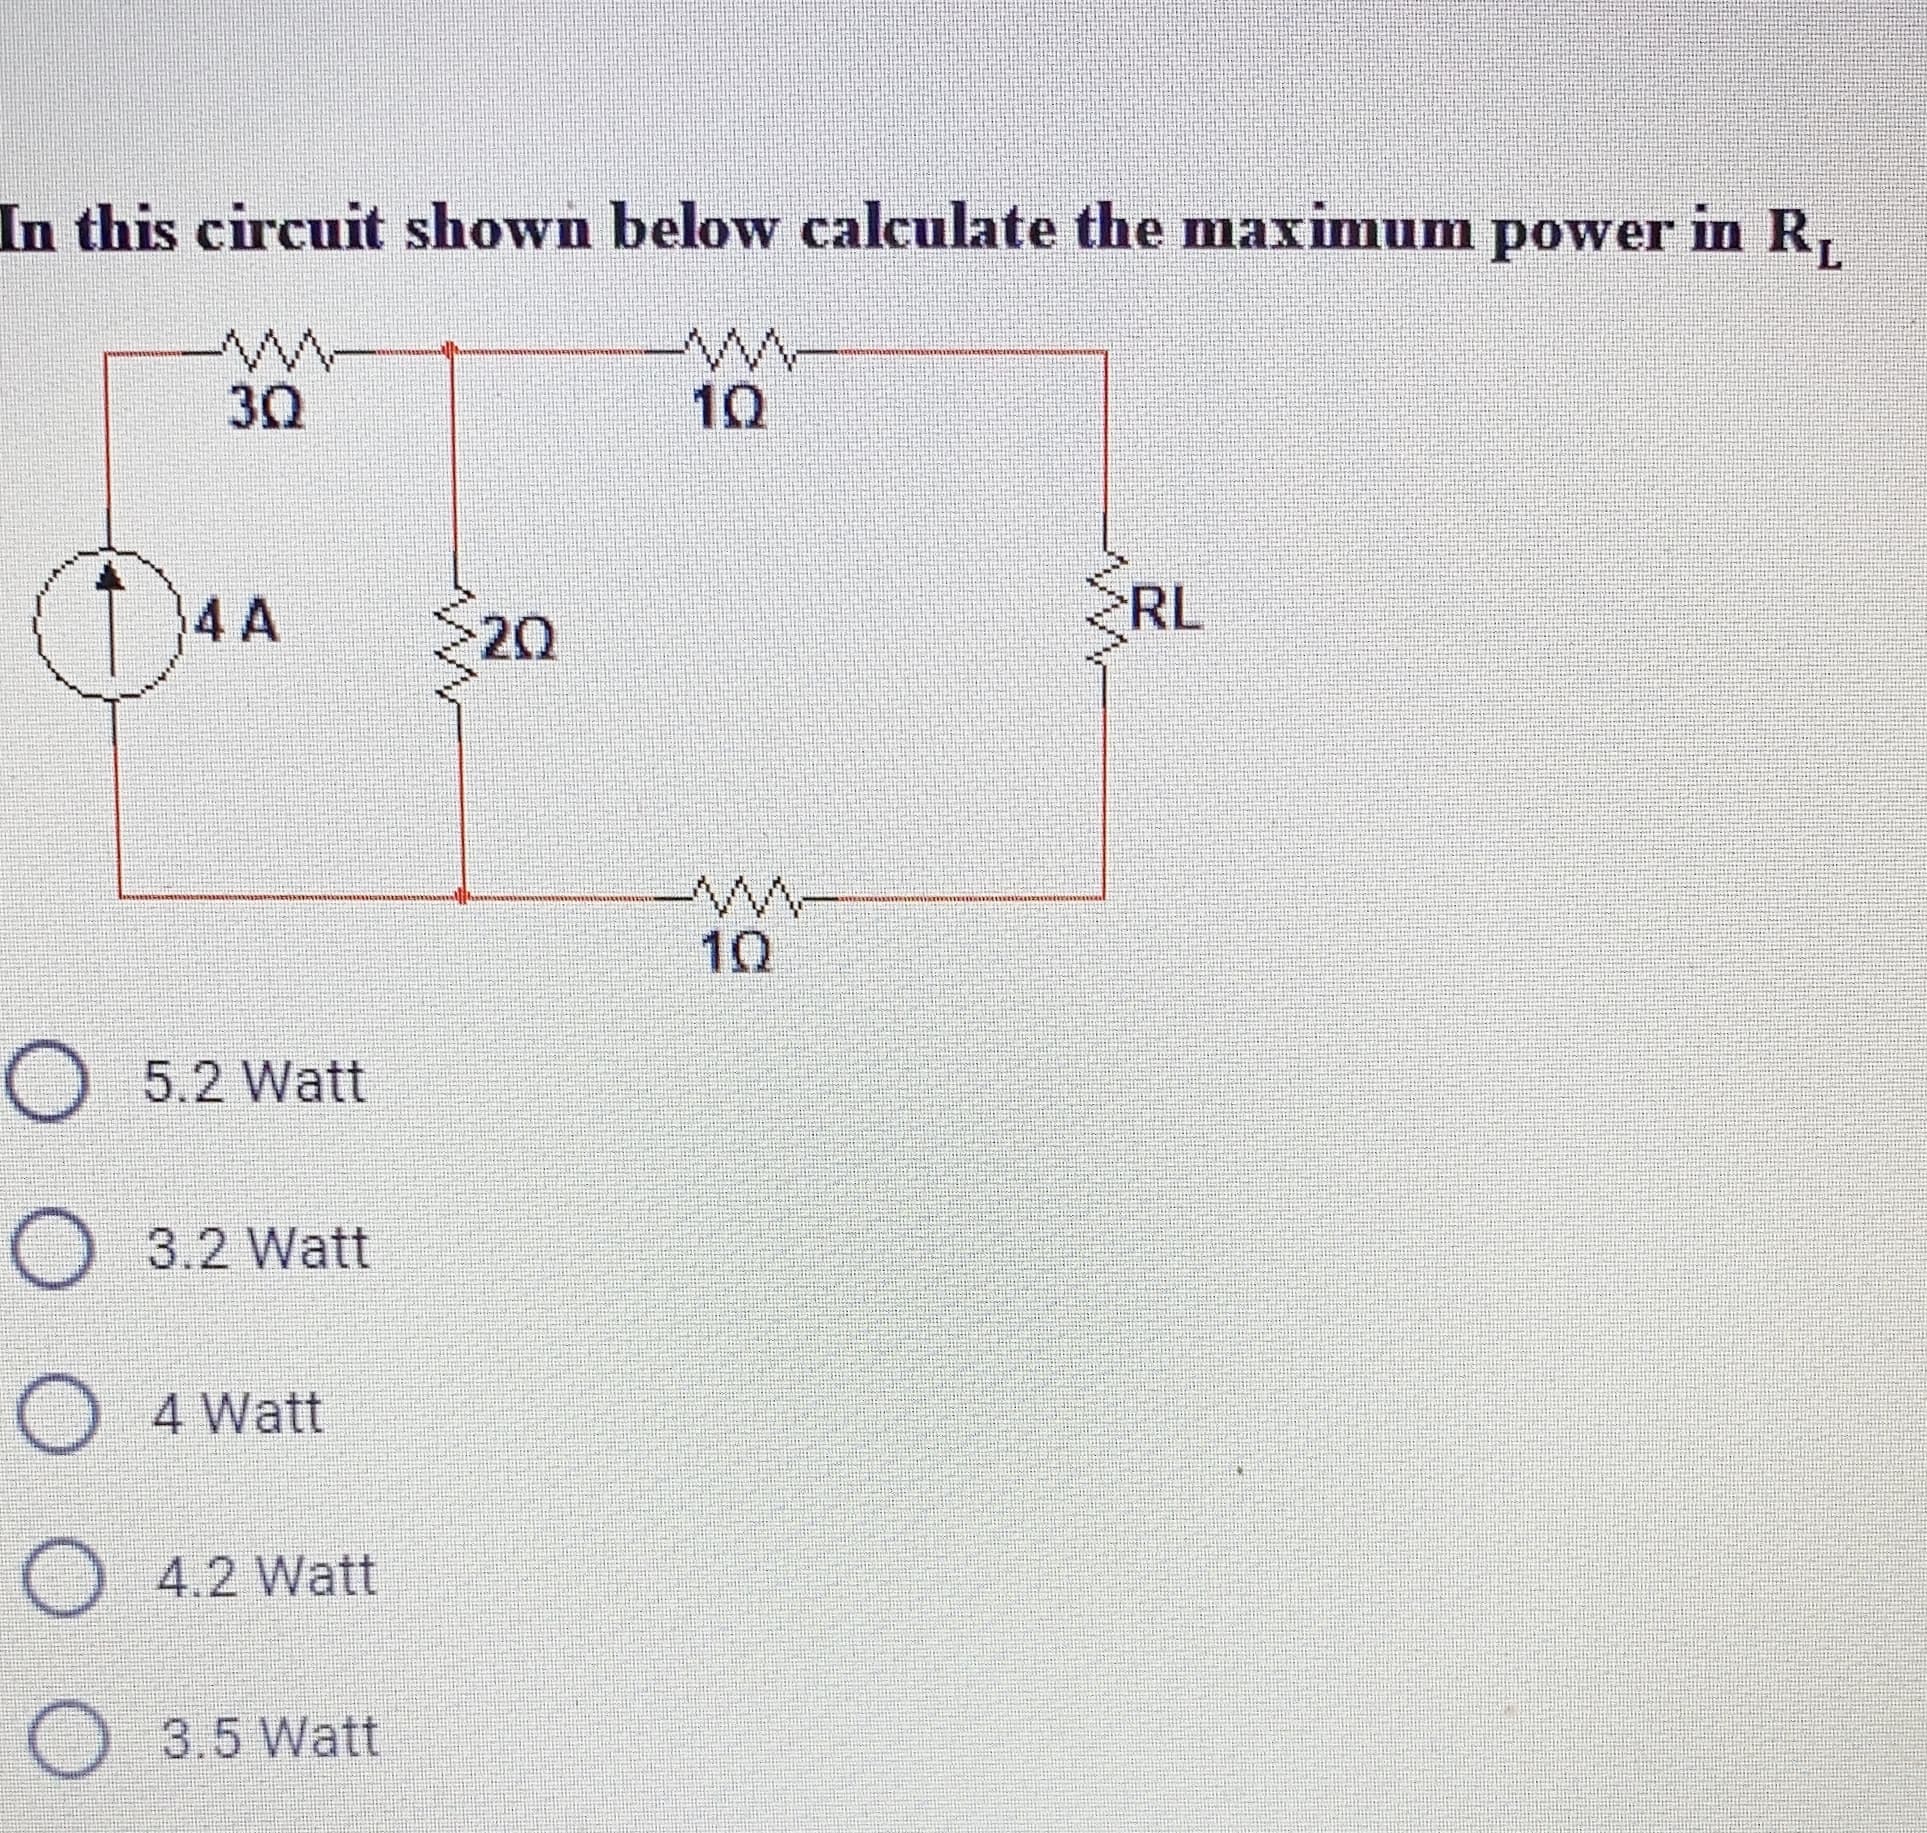 In this circuit shown below calculate the maximum power in R,
30
10
4 A
20
RL
10
